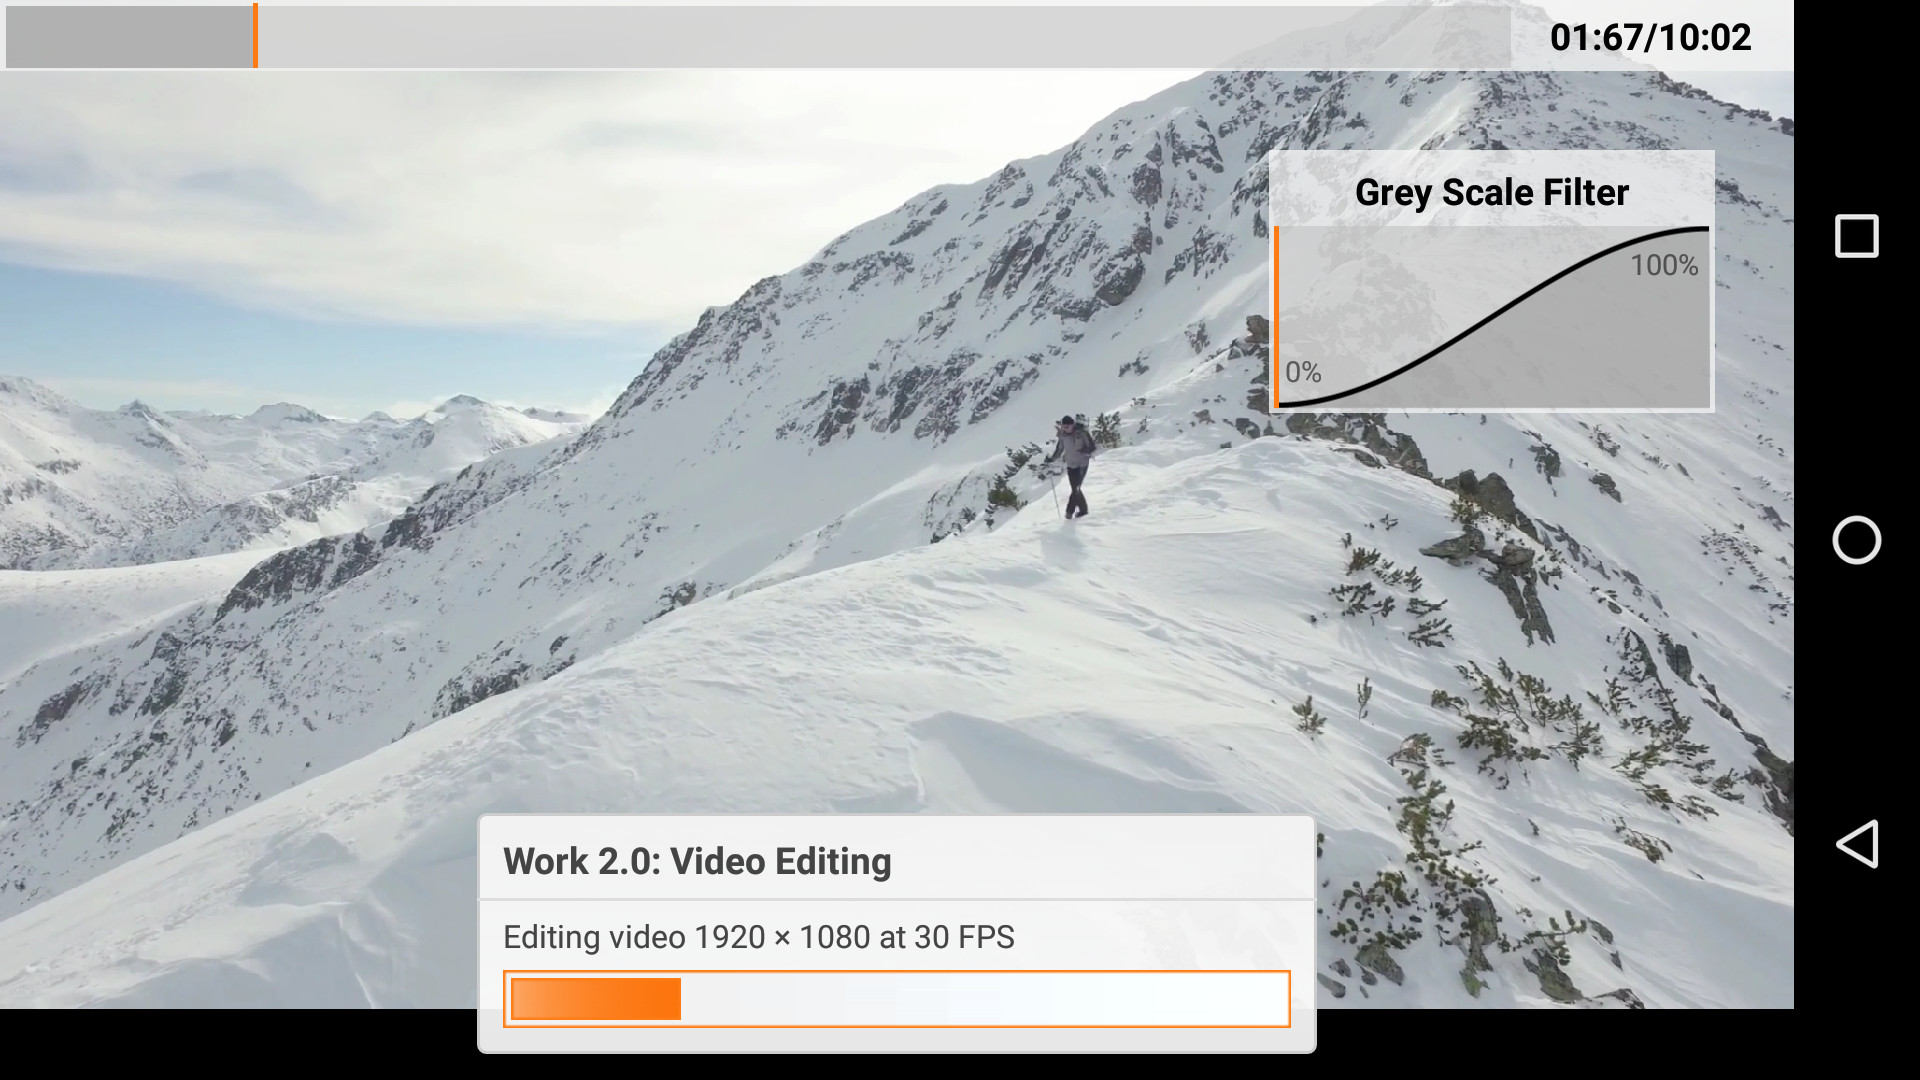 PCMark for Android Work 2.0 Video Editing test